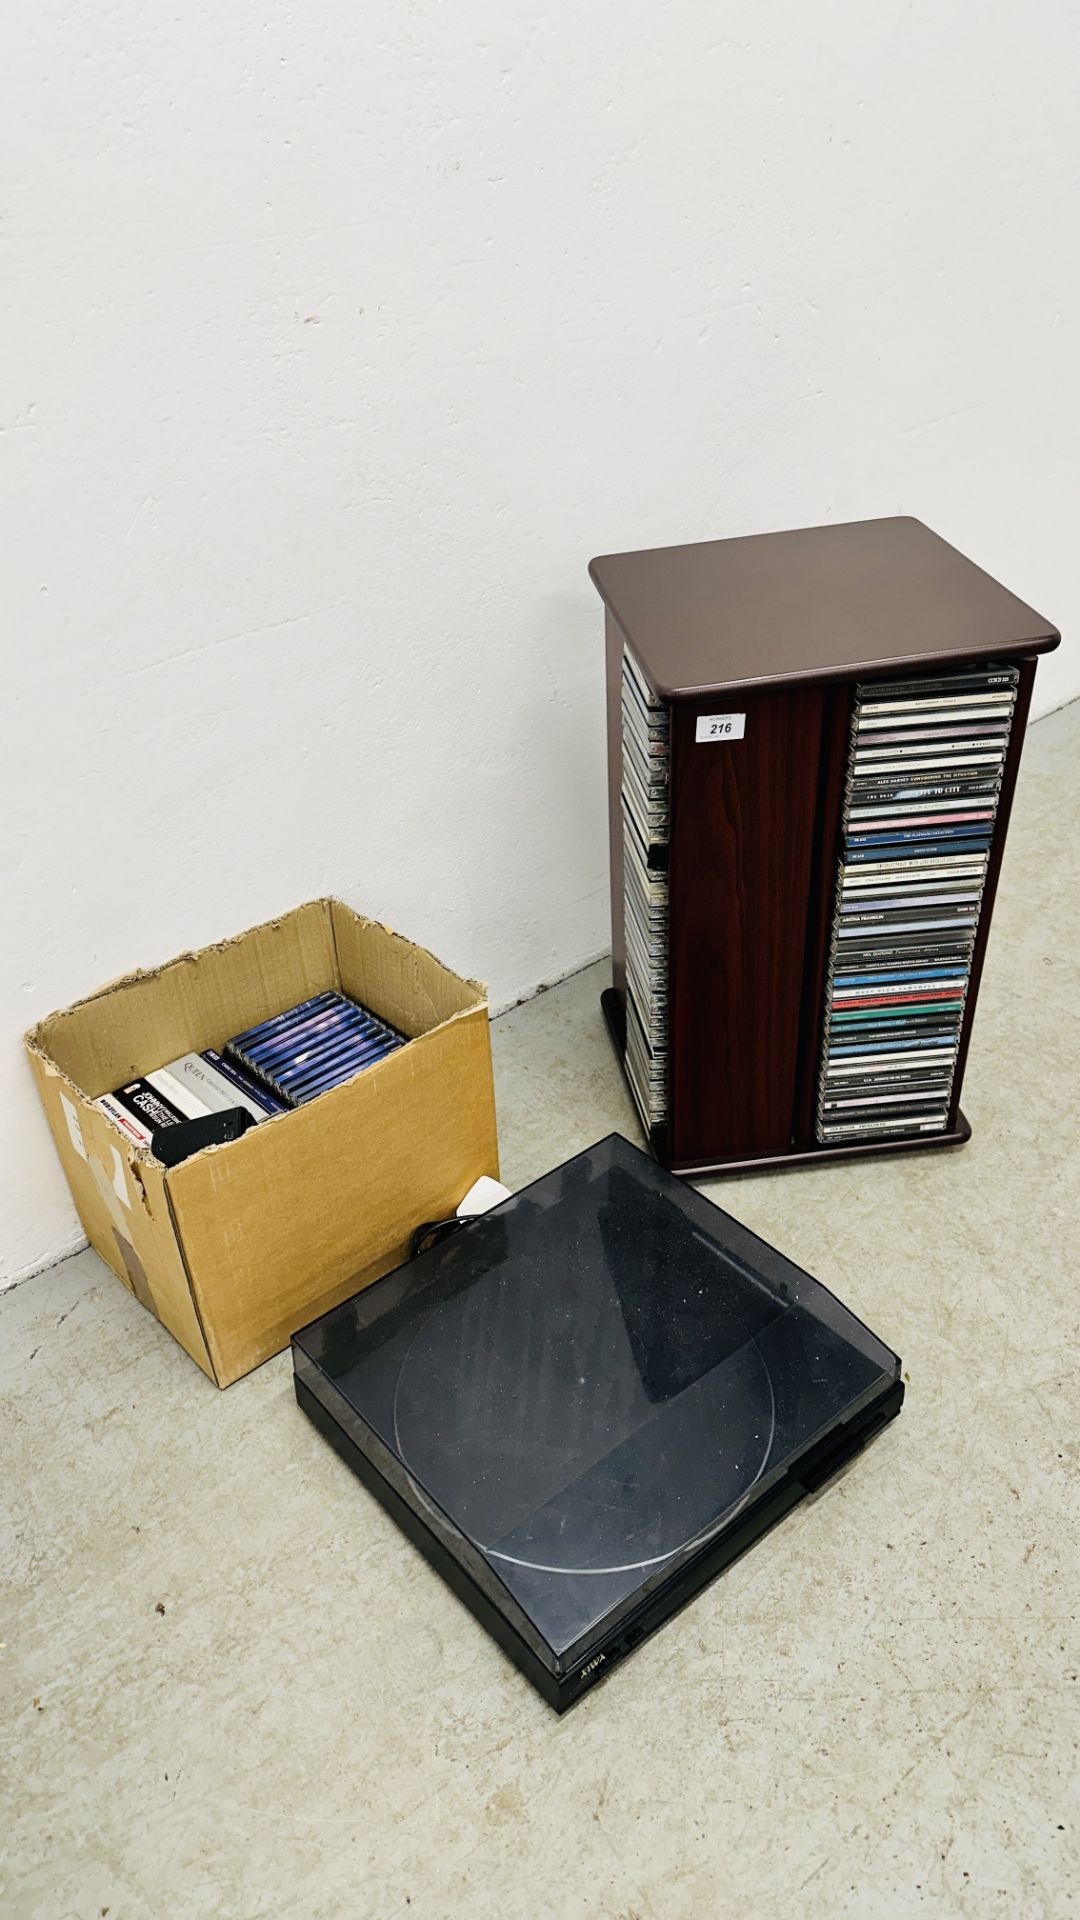 REVOLVING CD STORAGE RACK + QUANTITY MIXED CD'S AND RECORD PLAYER - SOLD AS SEEN.